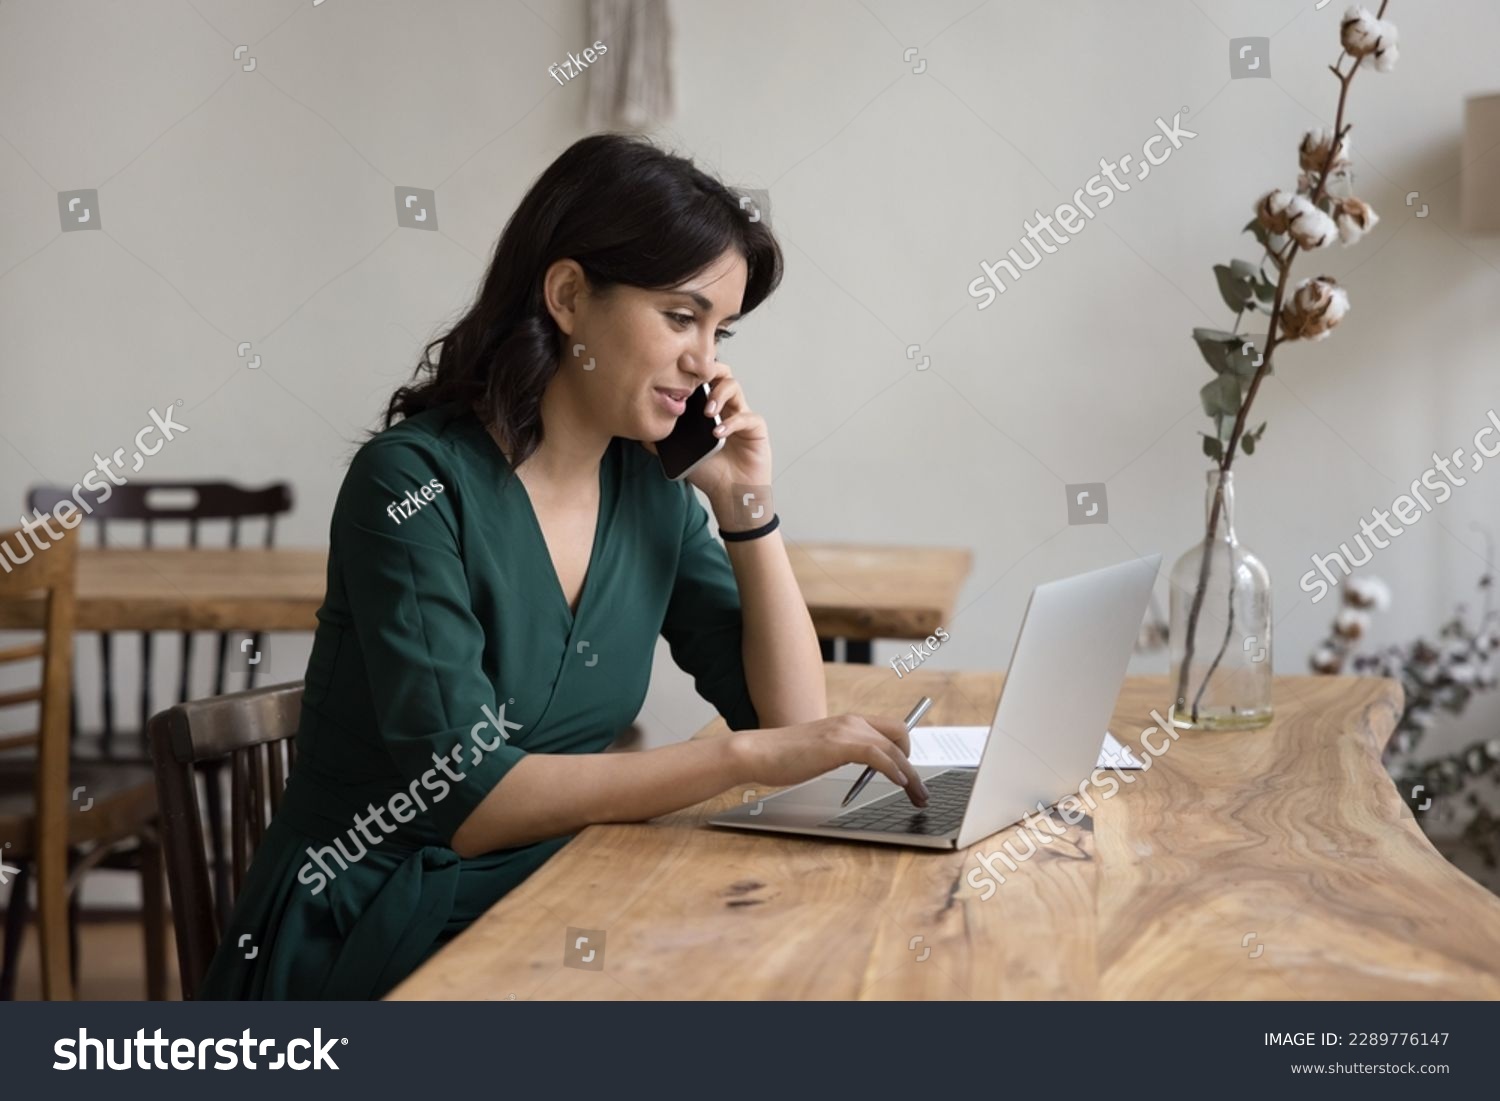 Businesswoman sits at desk, calling by business, provide consultation remotely, lead formal conversation to client, use laptop working in cozy office, make order engaged in workflow using modern tech #2289776147